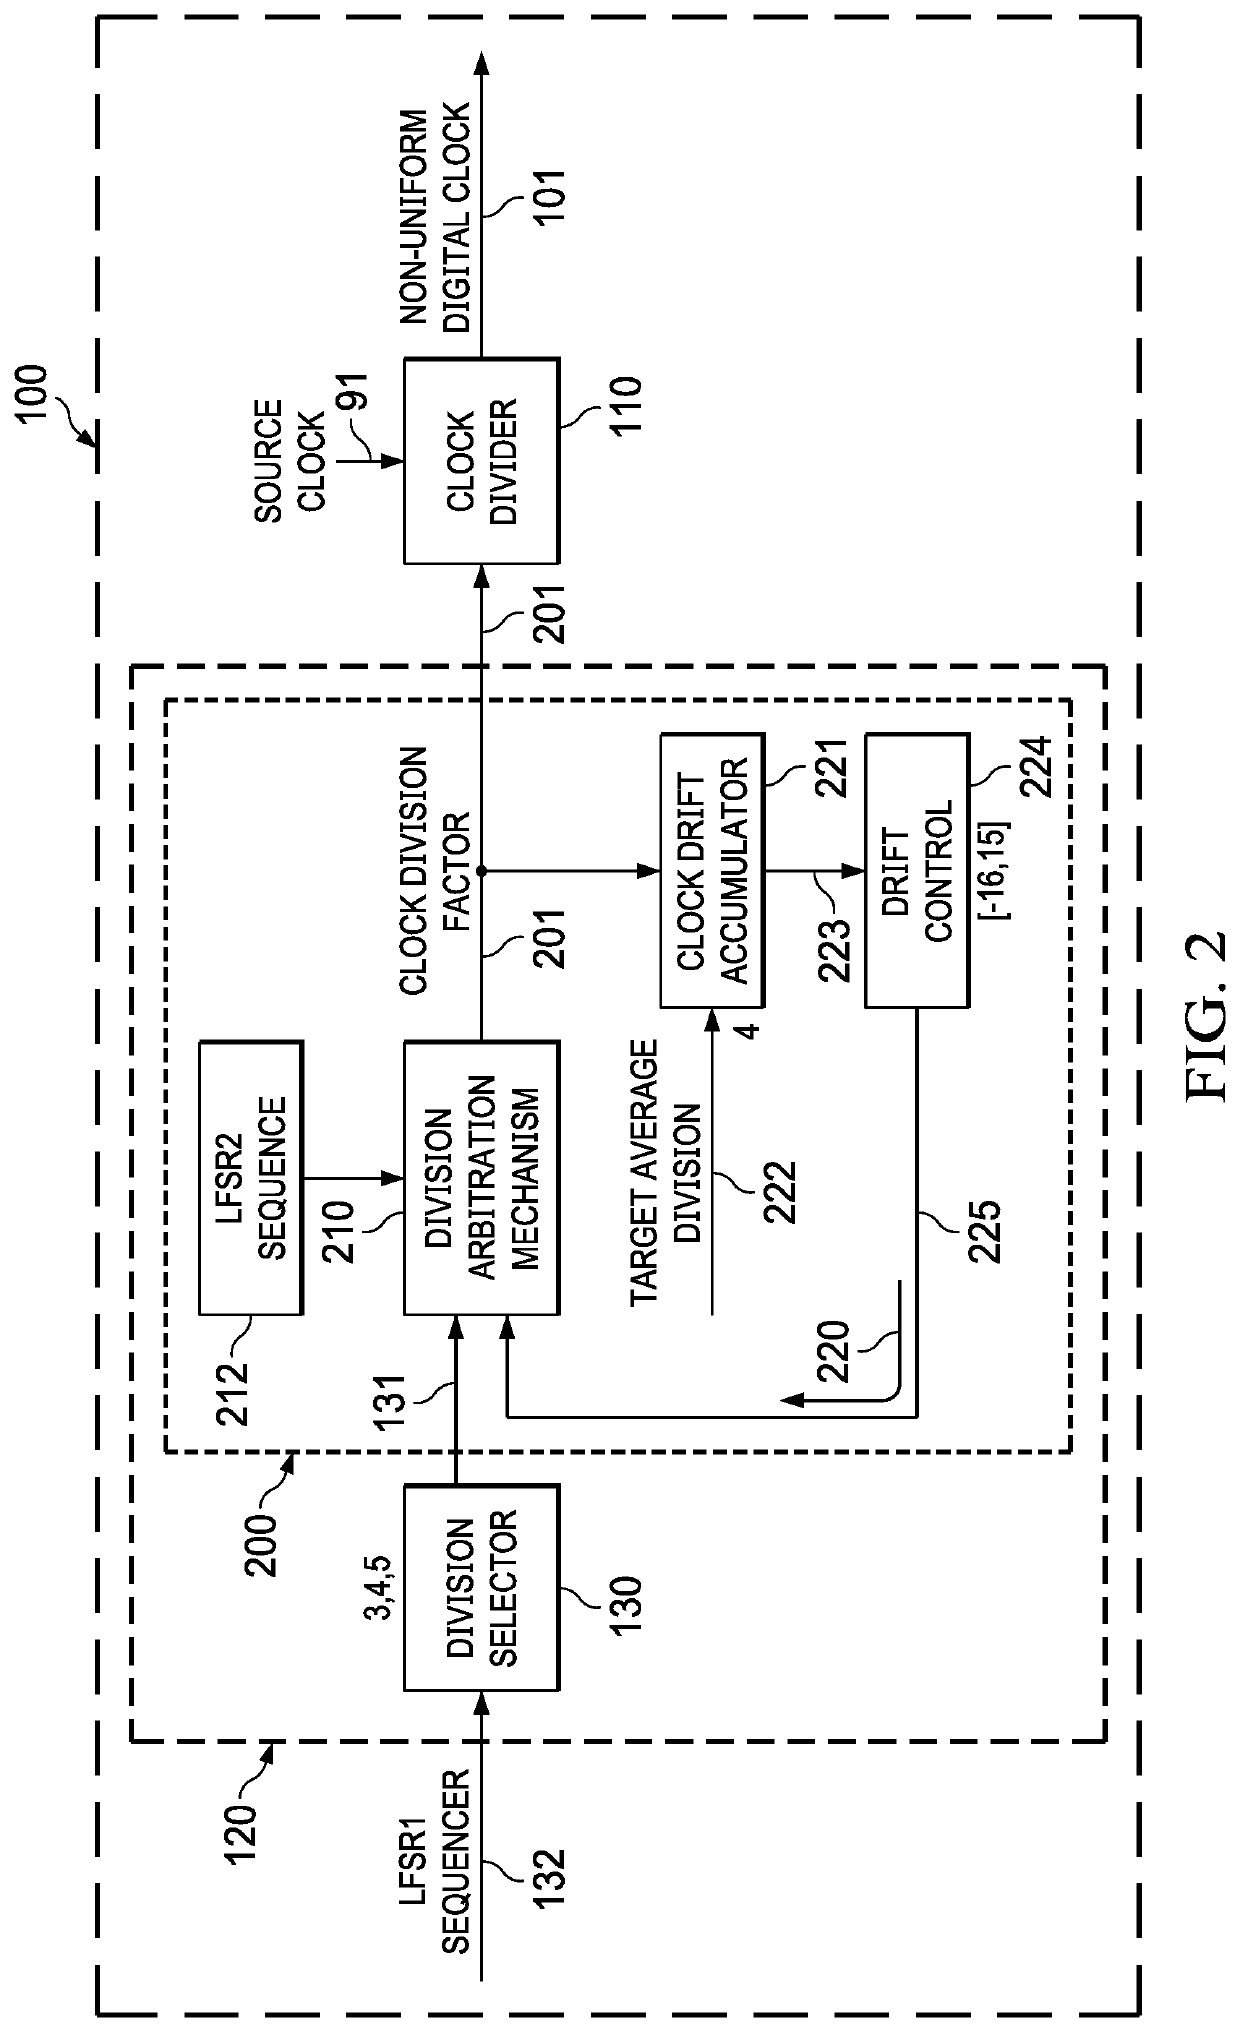 Digital clock generation with randomized division of a source clock